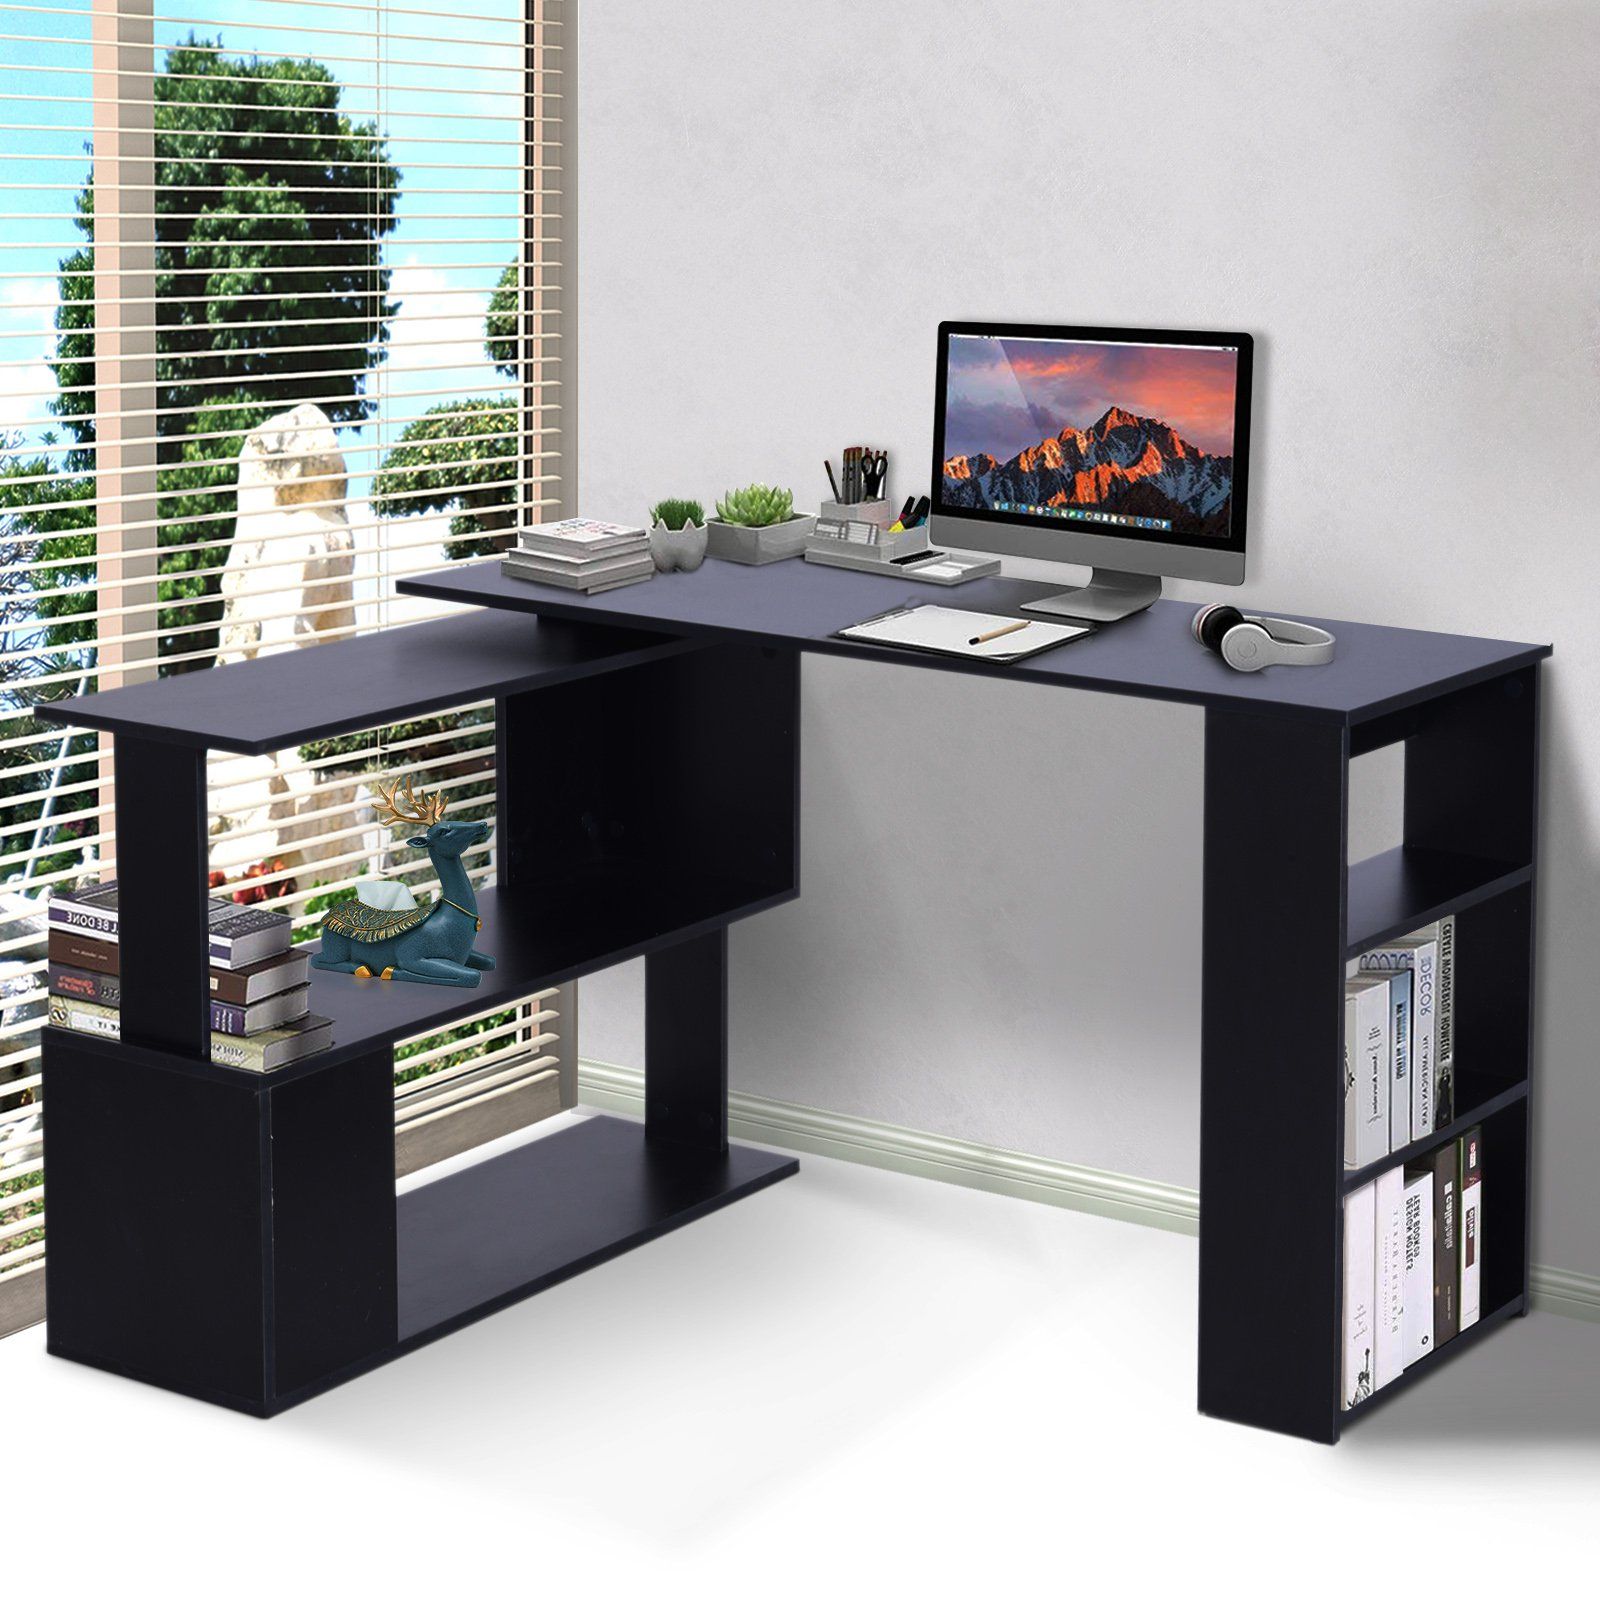 360° Rotating Home Office Corner Desk And Storage Shelf Combo – Black Within Black And Cinnamon Office Desks (View 5 of 15)